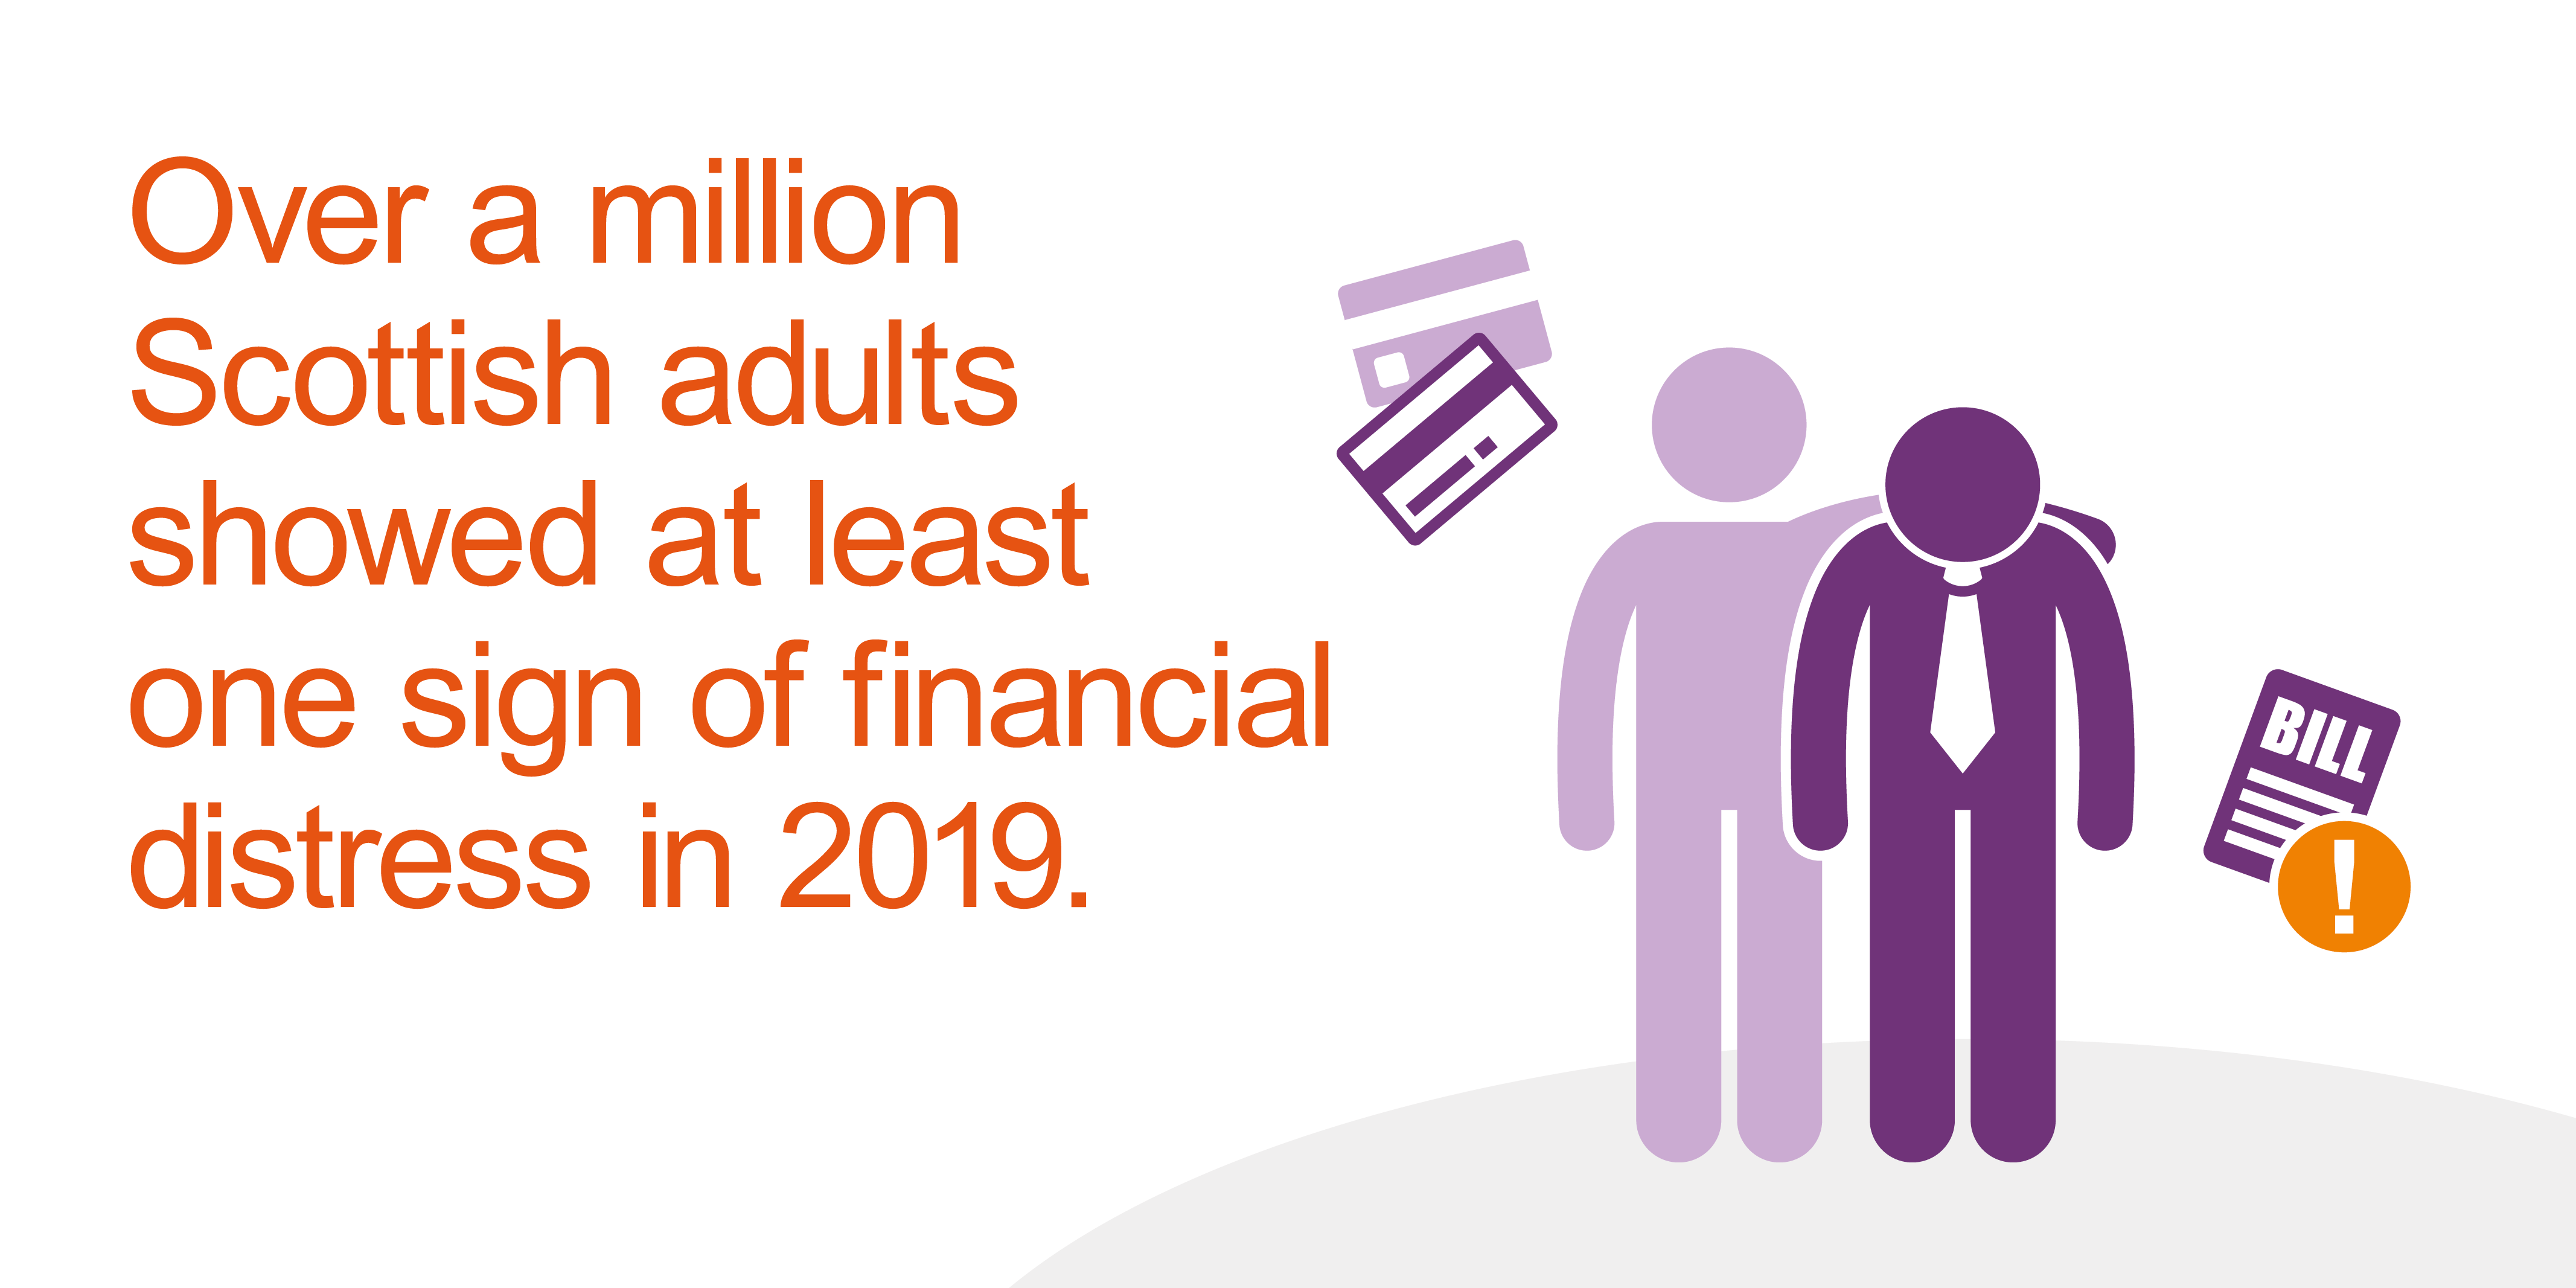 Over one million Scottish adults showed signs of financial distress in 2019